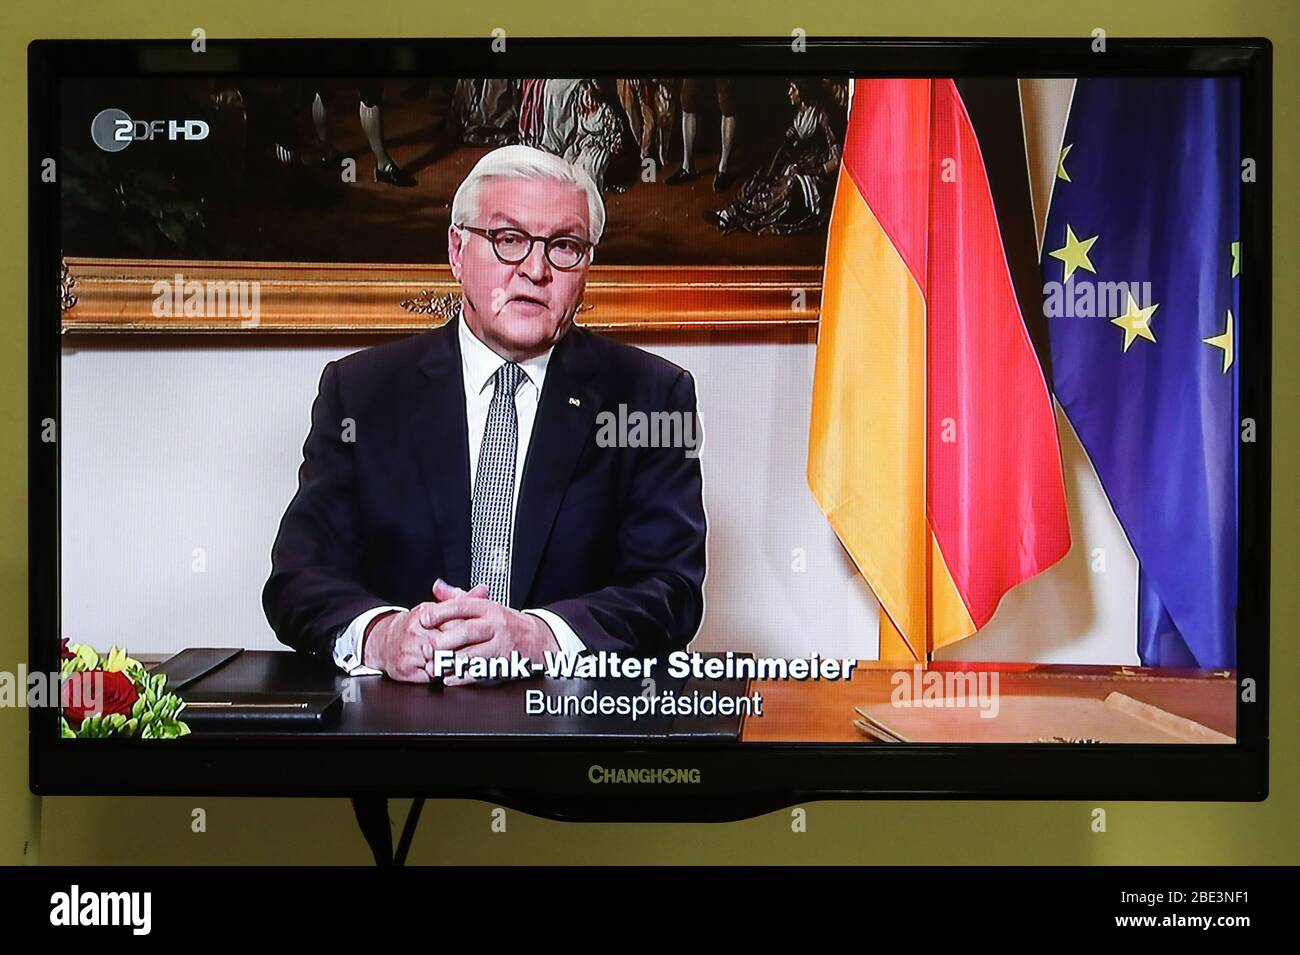 Berlin. 11th Apr, 2020. Photo taken on April 11, 2020 shows German President Frank-Walter Steinmeier delivering a televised speech on COVID-19, in Berlin, capital of Germany. The coronavirus pandemic has placed Germany at a crossroads that will determine whether it recedes into fearfulness or becomes a more 'considerate and hopeful' society, German President Frank-Walter Steinmeier said. According to the Robert Koch Institute, almost 120,000 people in Germany have tested positive for the coronavirus, and more than 2,500 have died as of Friday midnight. Credit: Shan Yuqi/Xinhua/Alamy Live News Stock Photo